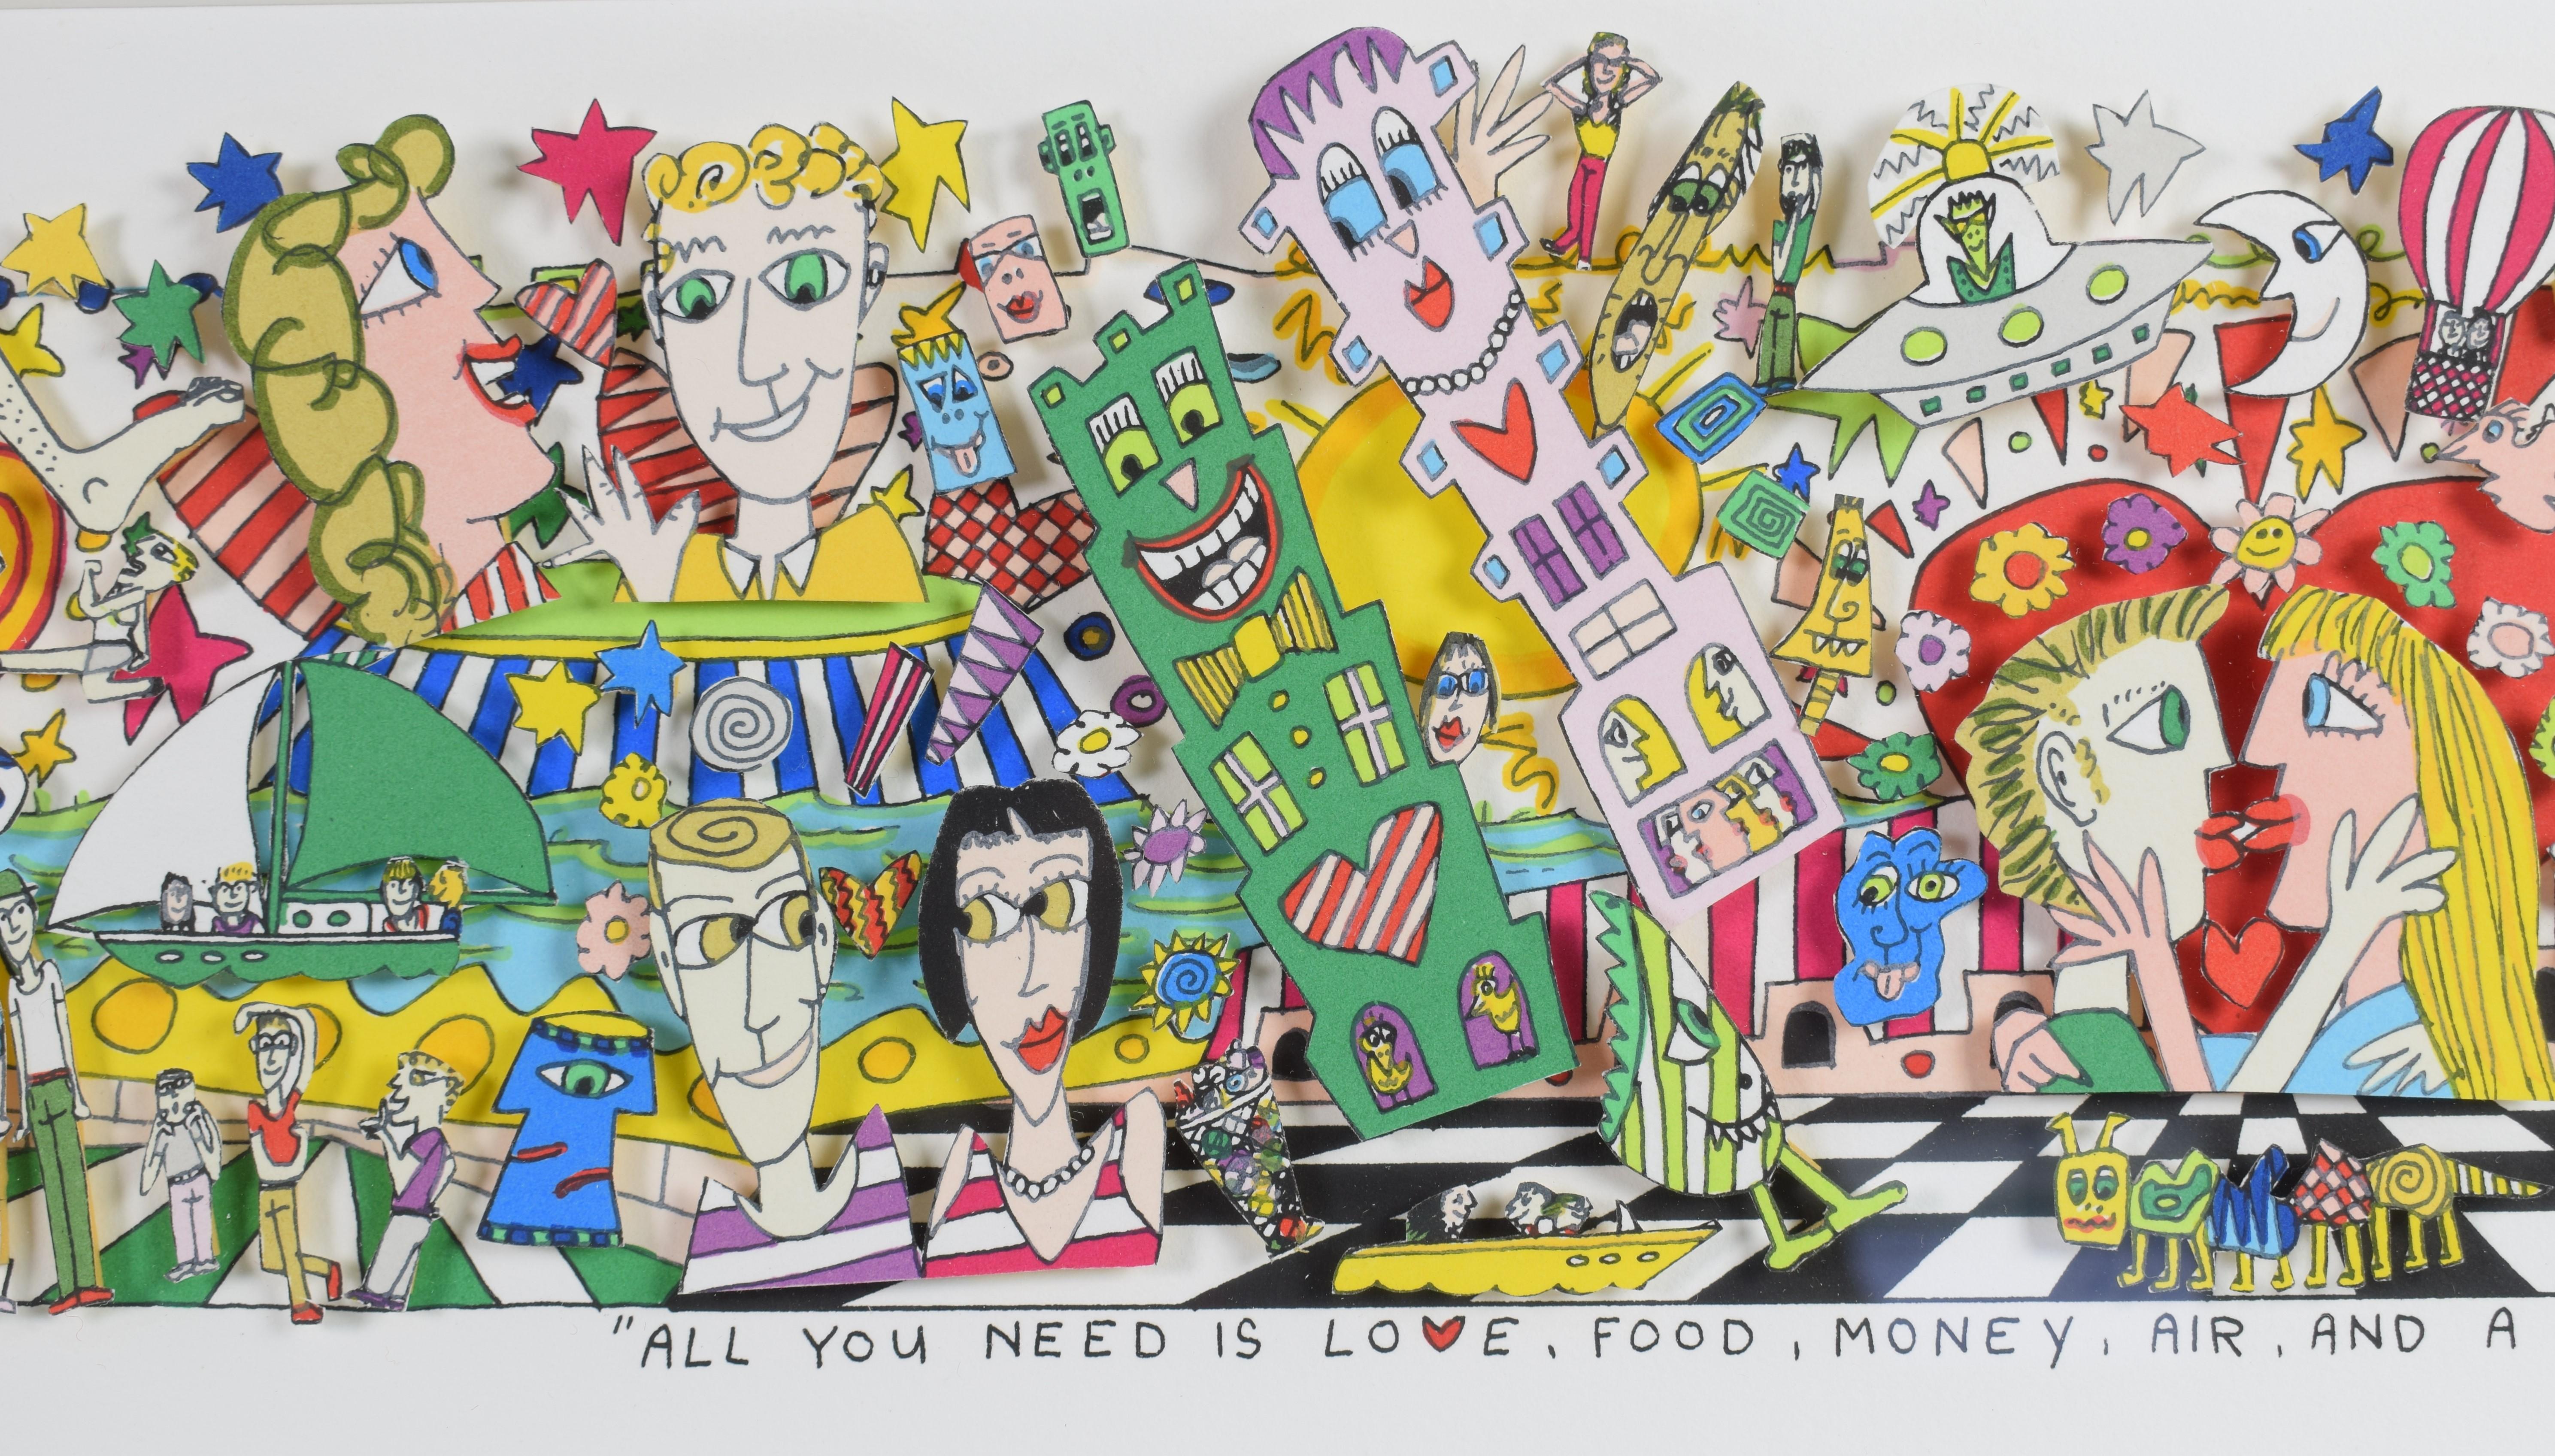 James Rizzi (New York, October 5, 1950 - there, December 26, 2011) was an American pop art artist from Brooklyn, New York.

James Rizzi studied at the Florida Art Academy (Gainesville). He came up with the idea of 3D multiples, now mostly associated